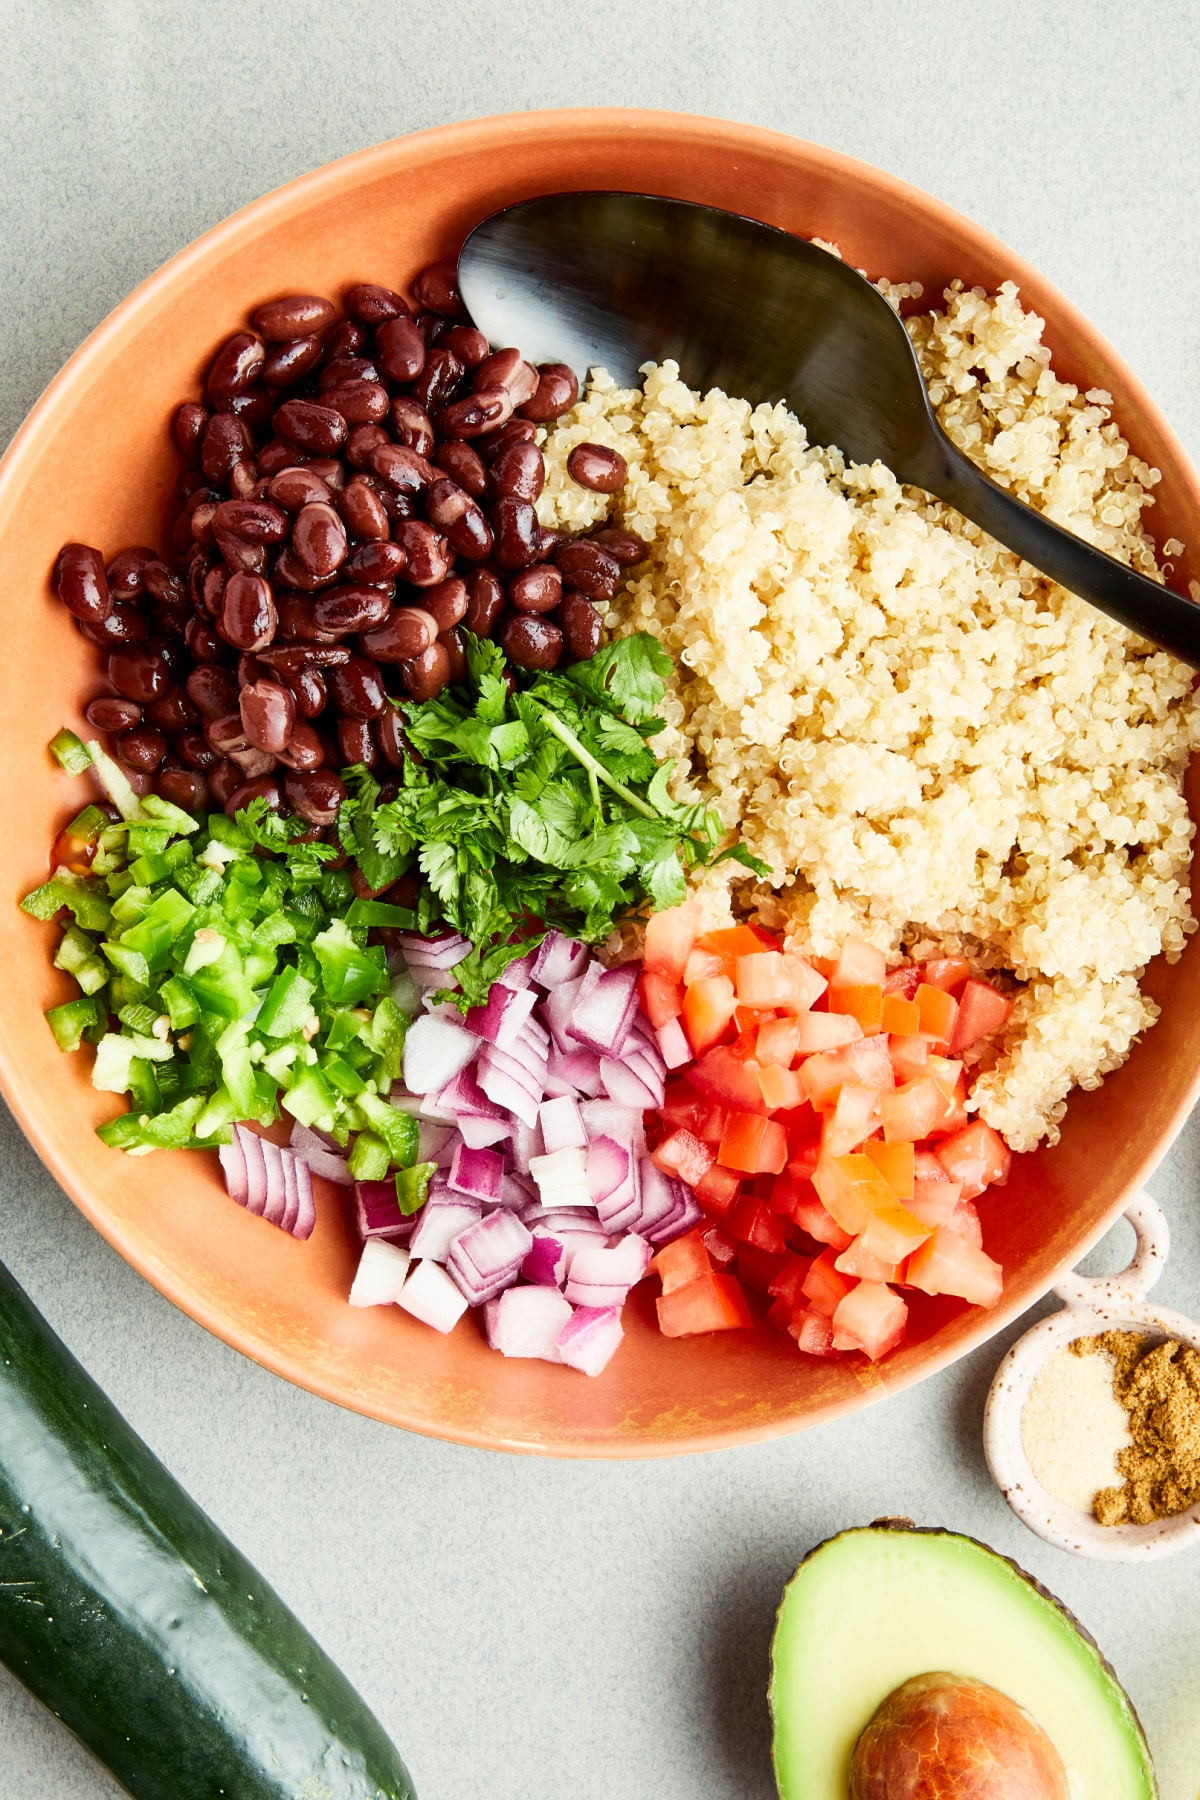 Overhead view of a terracotta colored bowl holds cooked black beans, quinoa, tomato, onion, jalapeno, and herbs before mixing. A whole cucumber, a small bowl of spices, and a half avocado sit next to the bowl.